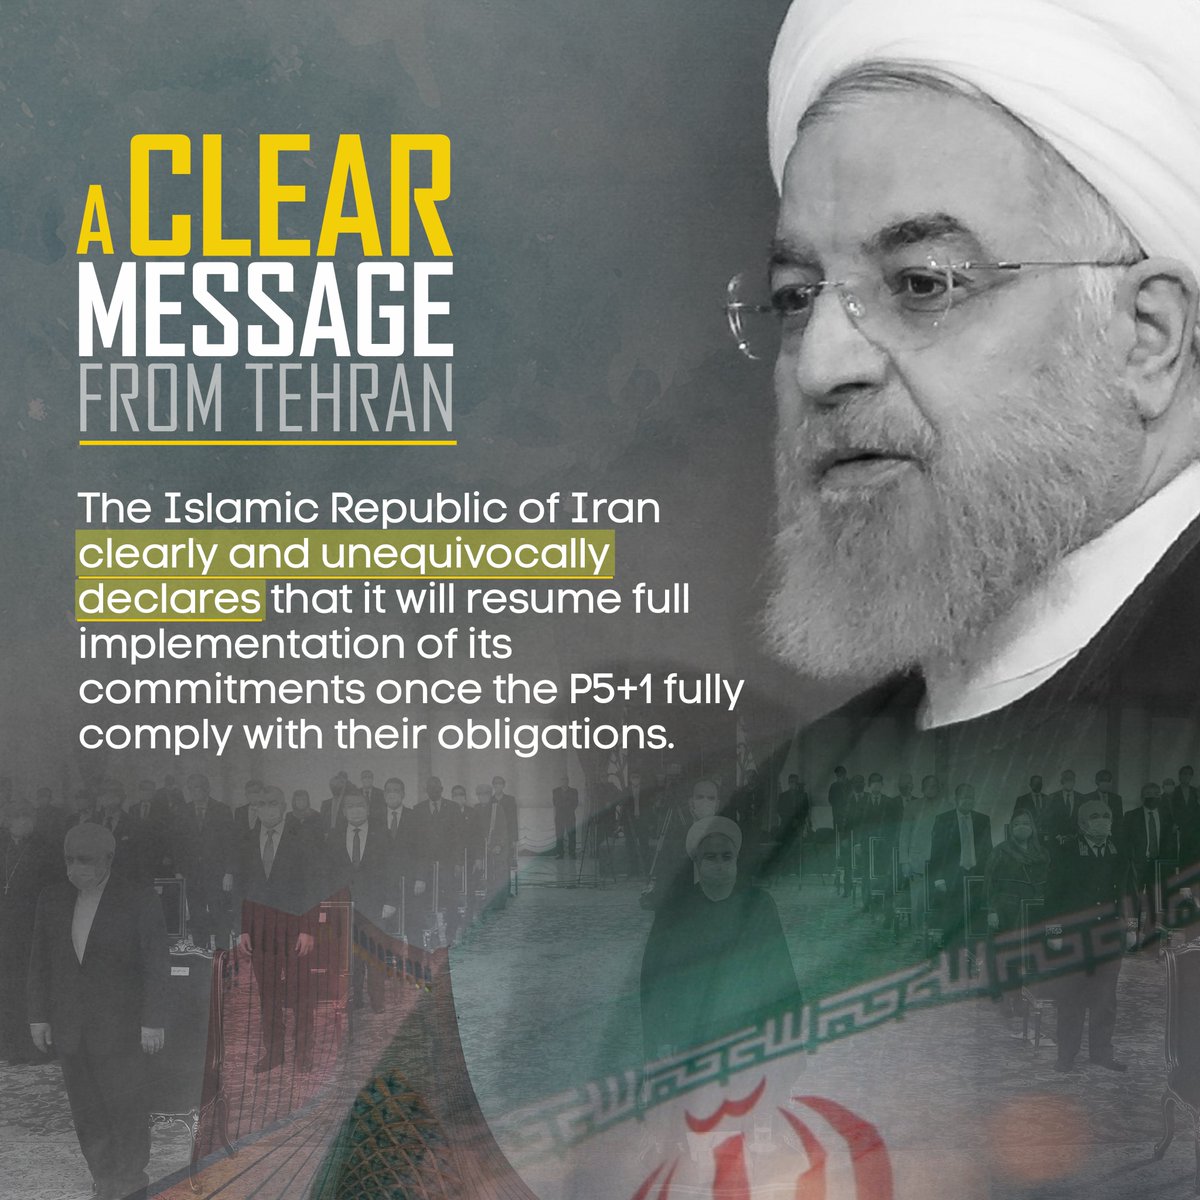 .@HassanRouhani : The Islamic Republic of #Iran clearly and unequivocally declares that it will resume full implementation of its commitments once the P5+1 fully comply with their obligations. #JCPOA